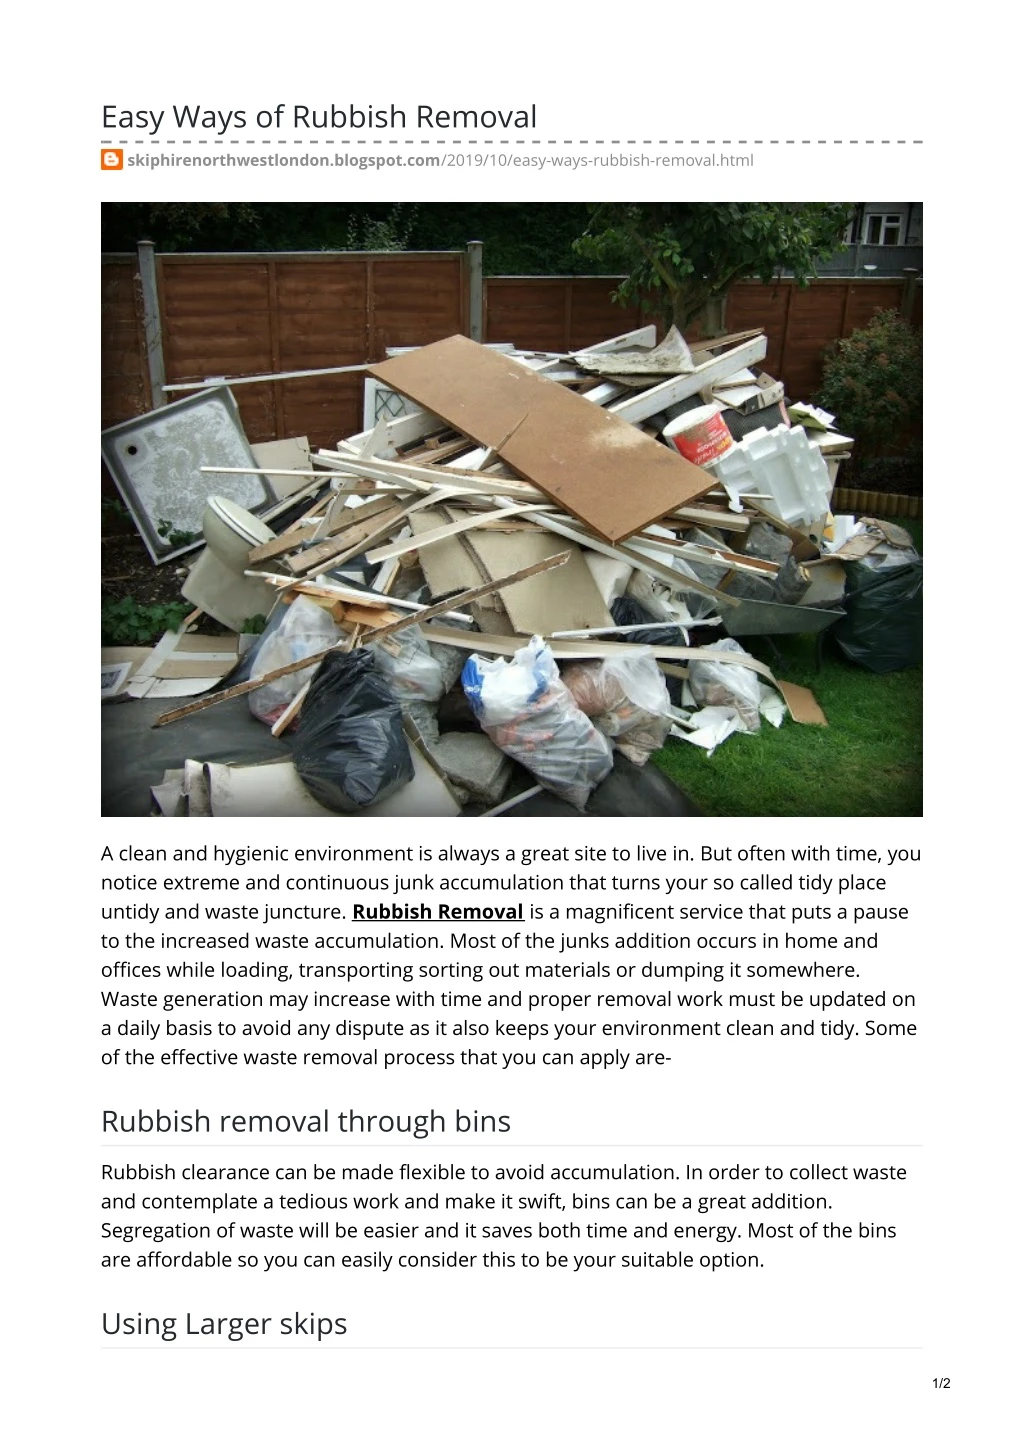 easy ways of rubbish removal